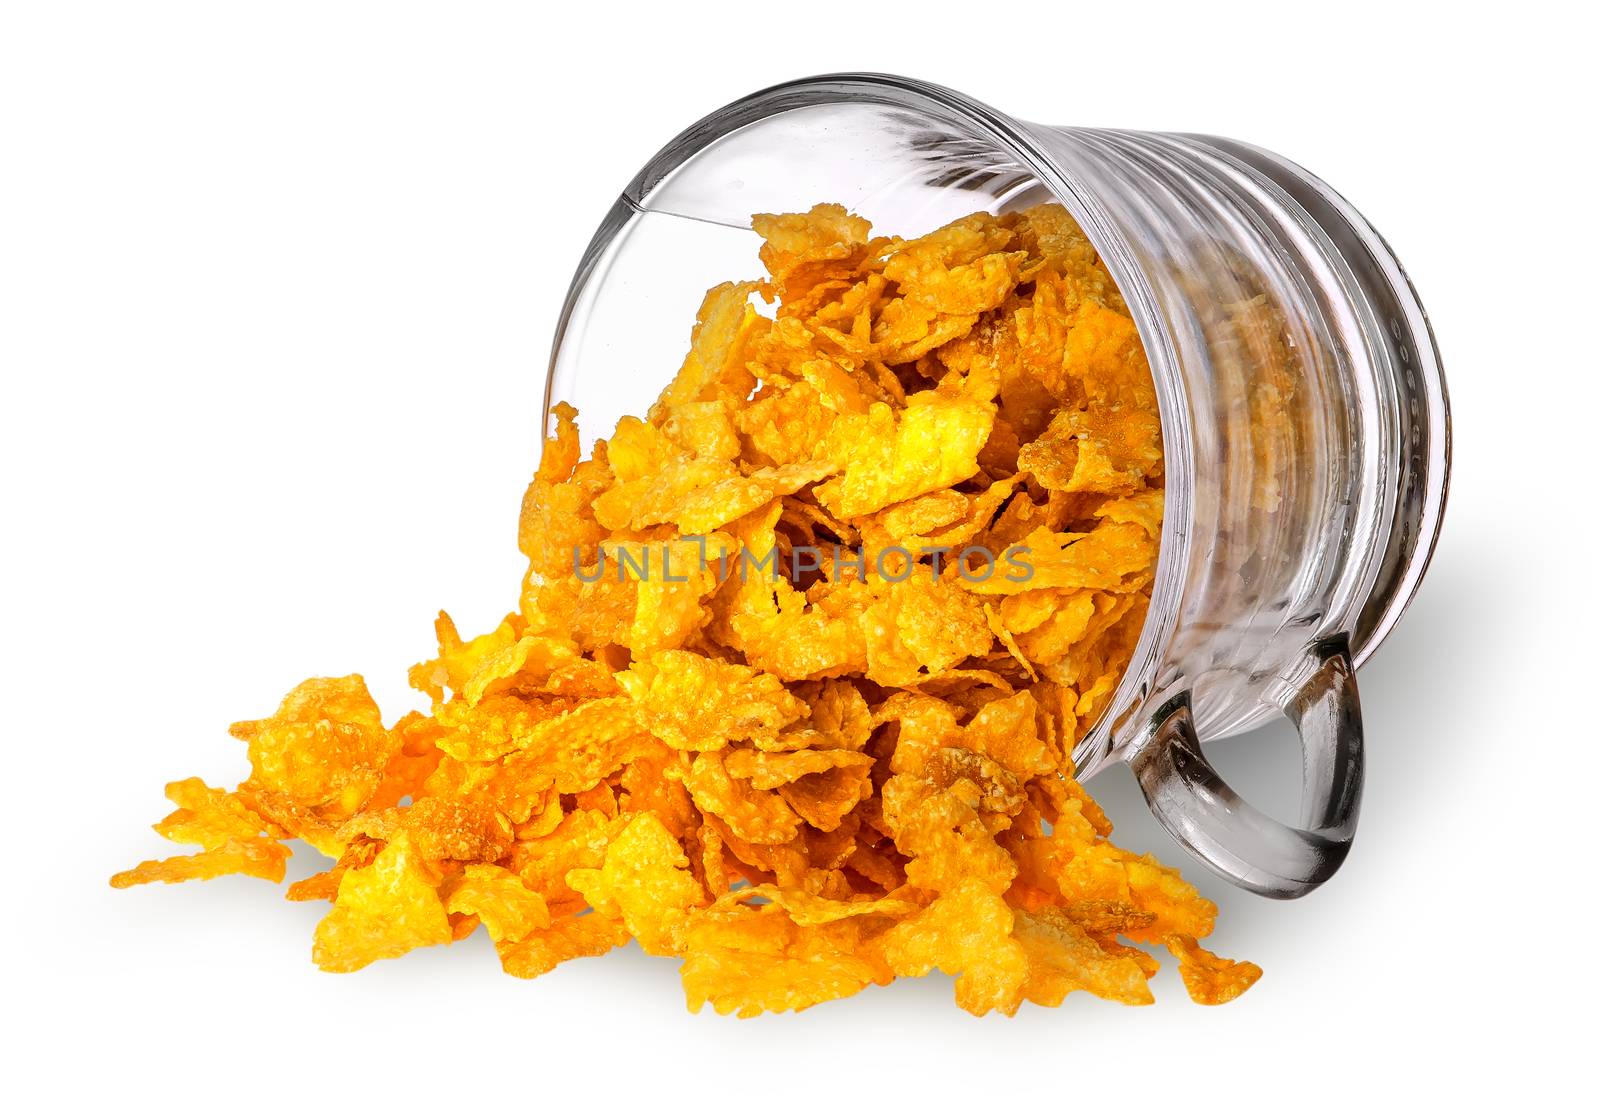 Cornflakes spill out of a glass cup by Cipariss